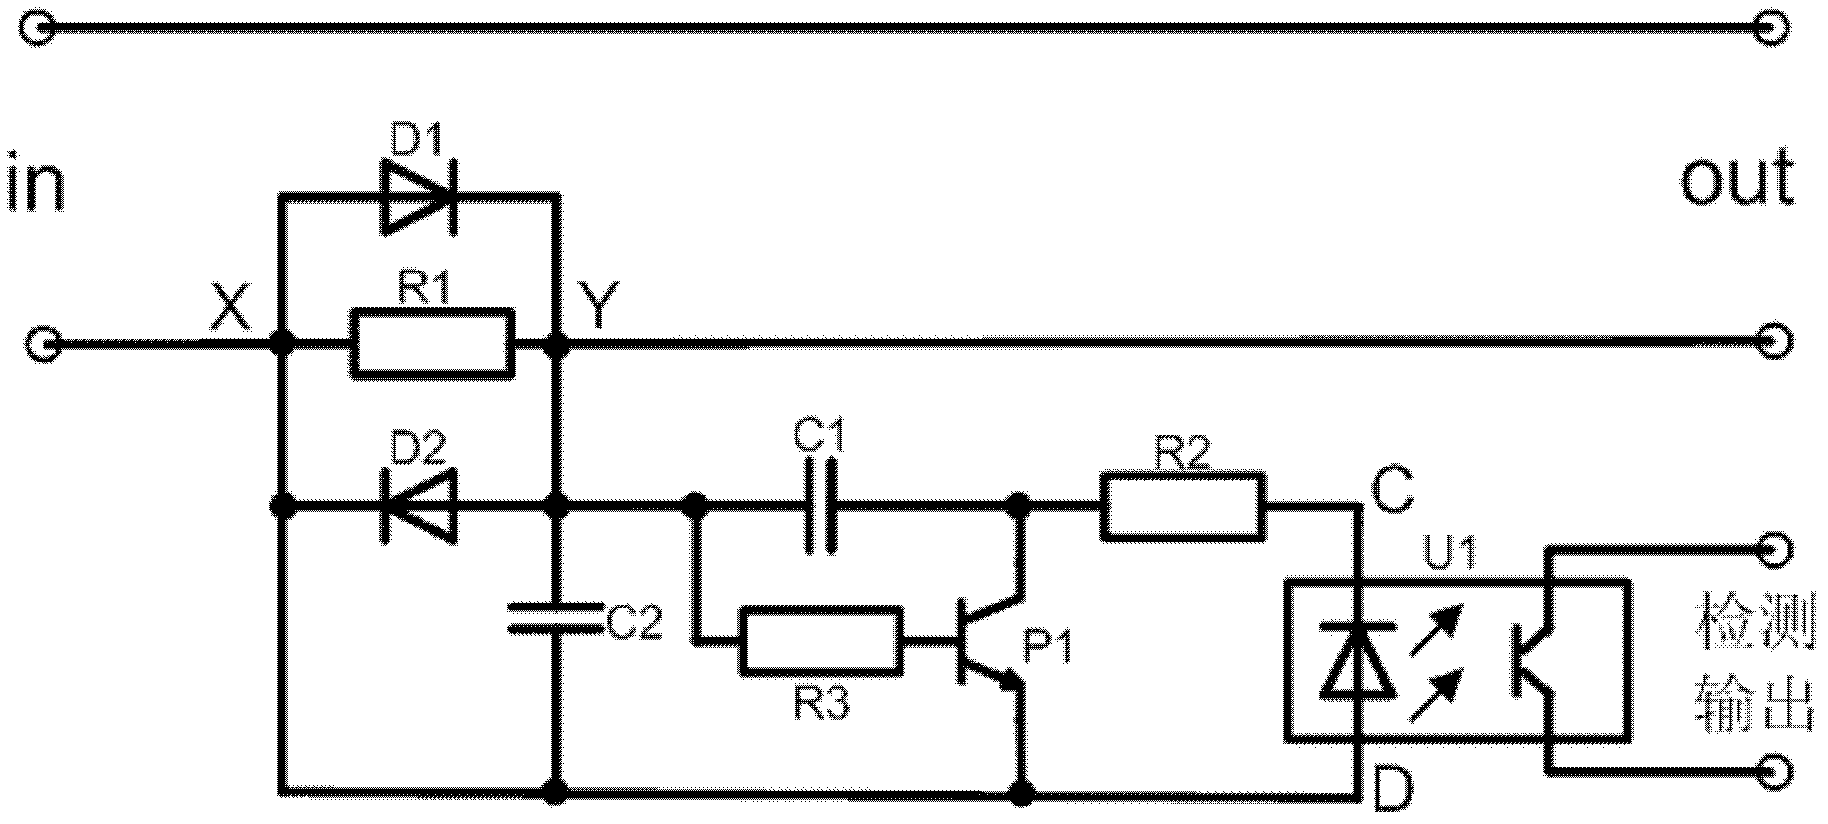 Alternating current detection circuit and automatic power-off circuit with zero power-off power consumption